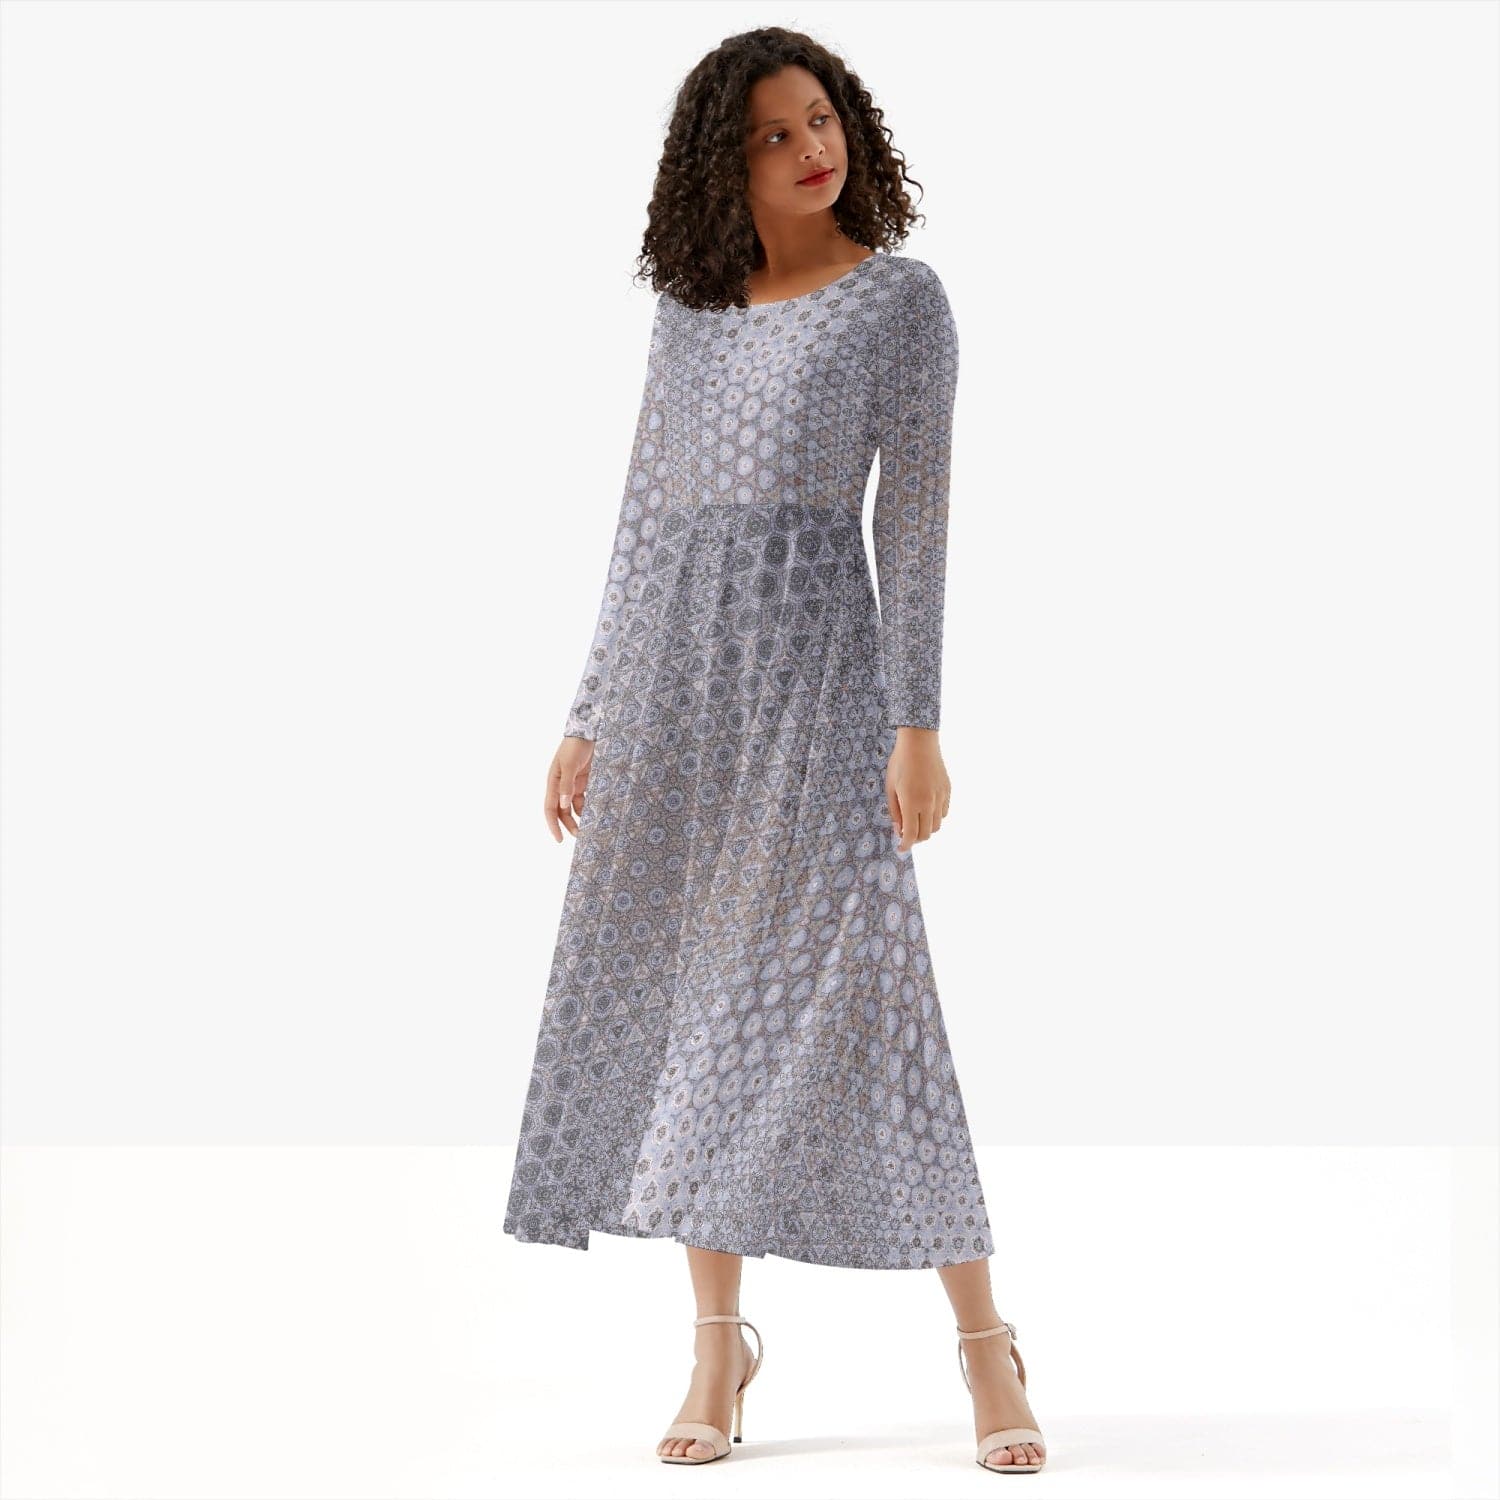 Soft Lila, grey fine patterned exclusively designed Women's Long-Sleeve One-piece Dress, by Sensus Studio Design